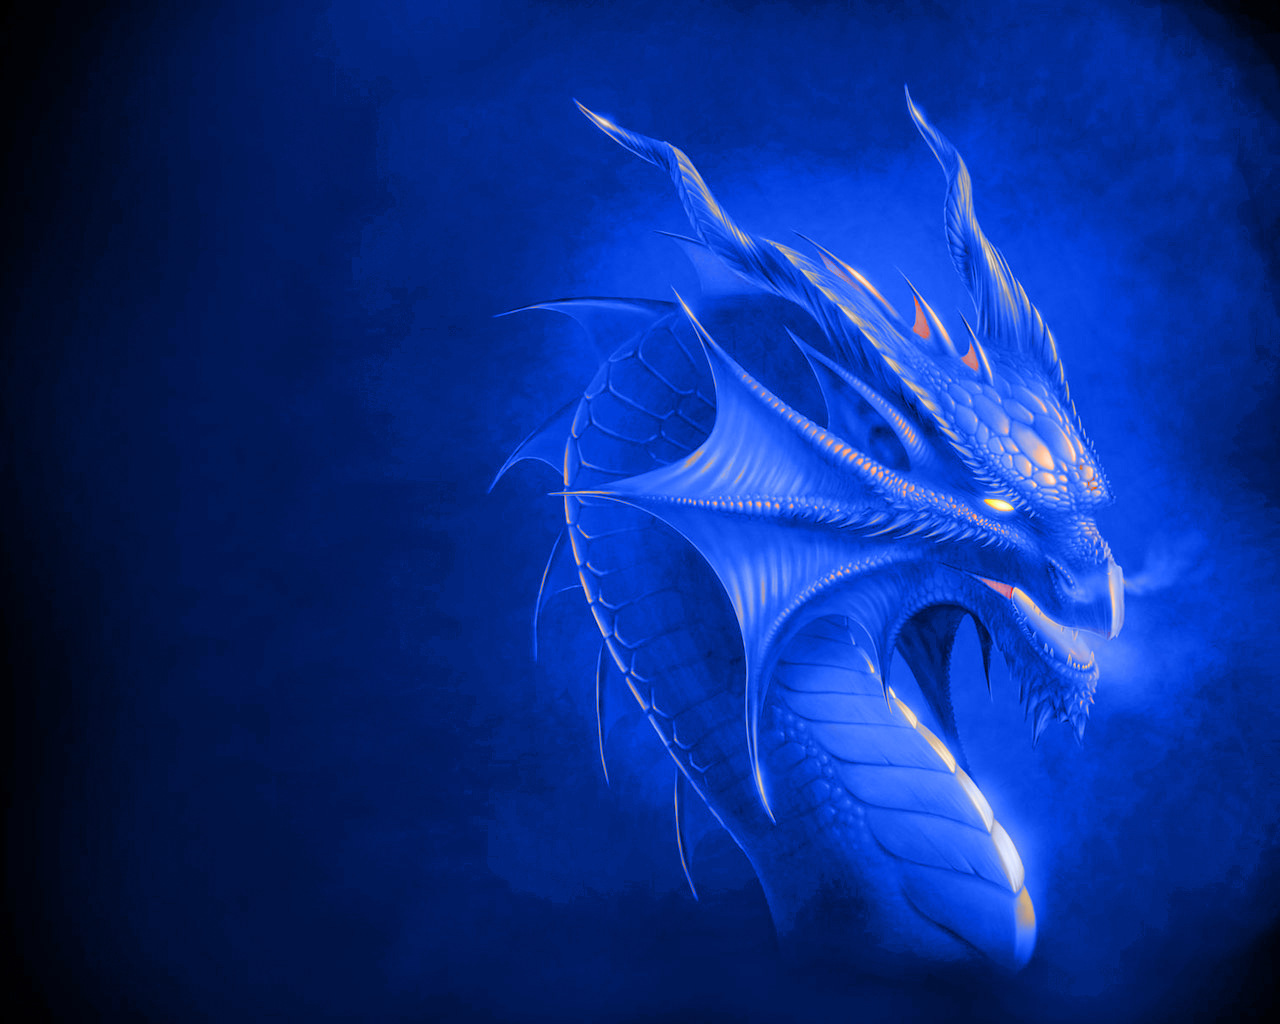 The Blue Dragon Wallpapers Wallpaper For Background